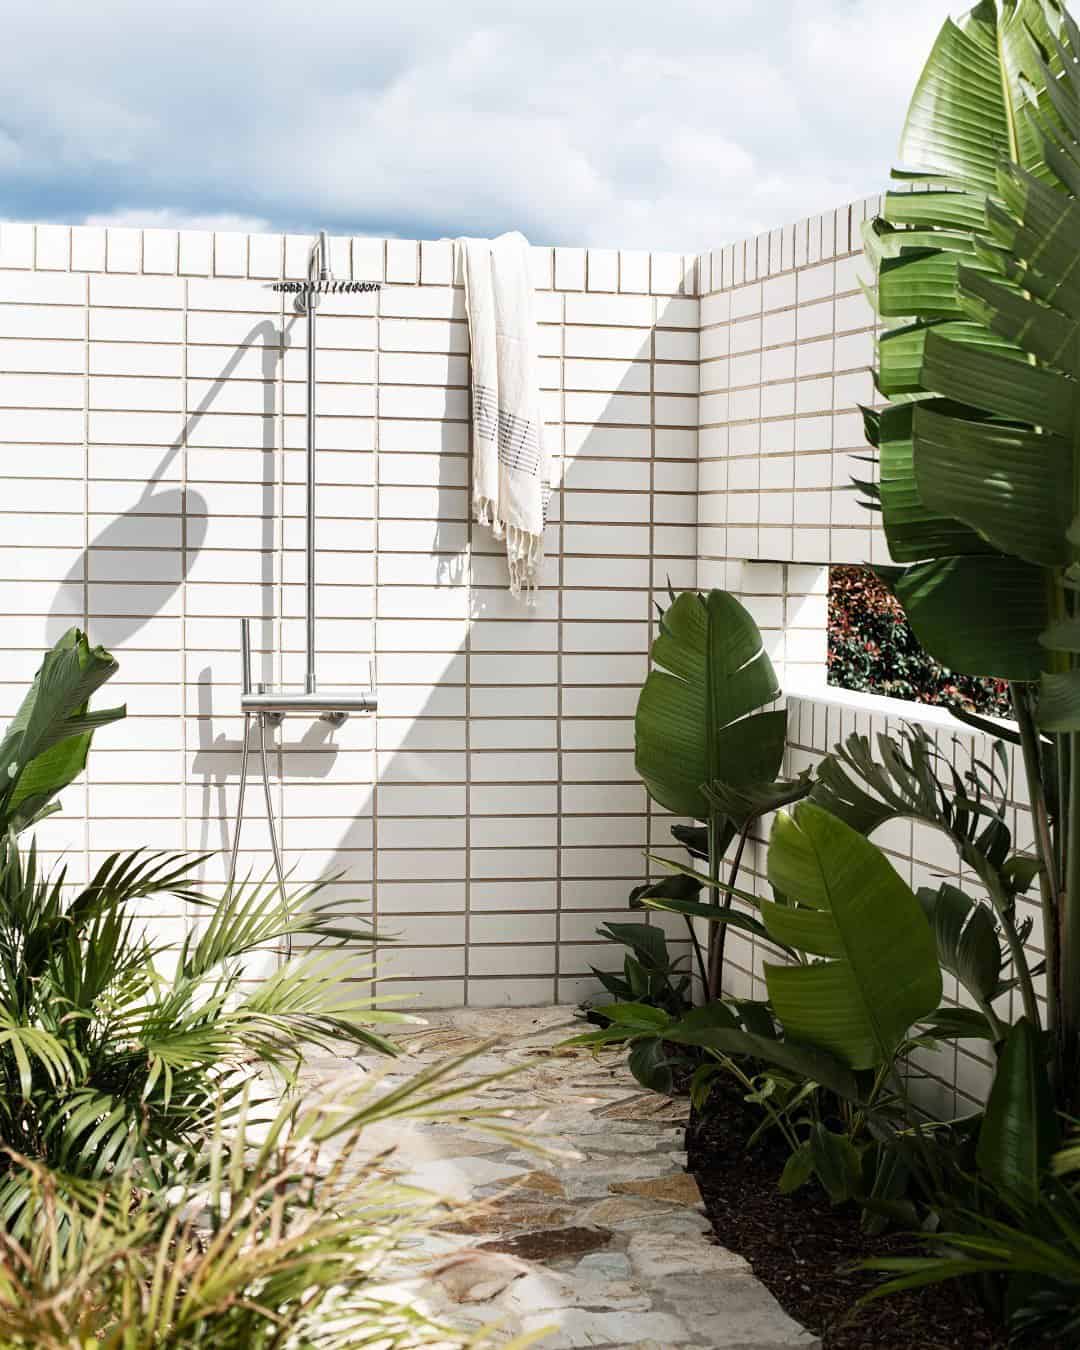 Outdoor shower area surrounded by white tile walls embellished with green tropical plants, offering a cool-off spot with a towel hanging on a steel hook, under a partly cloudy sky.